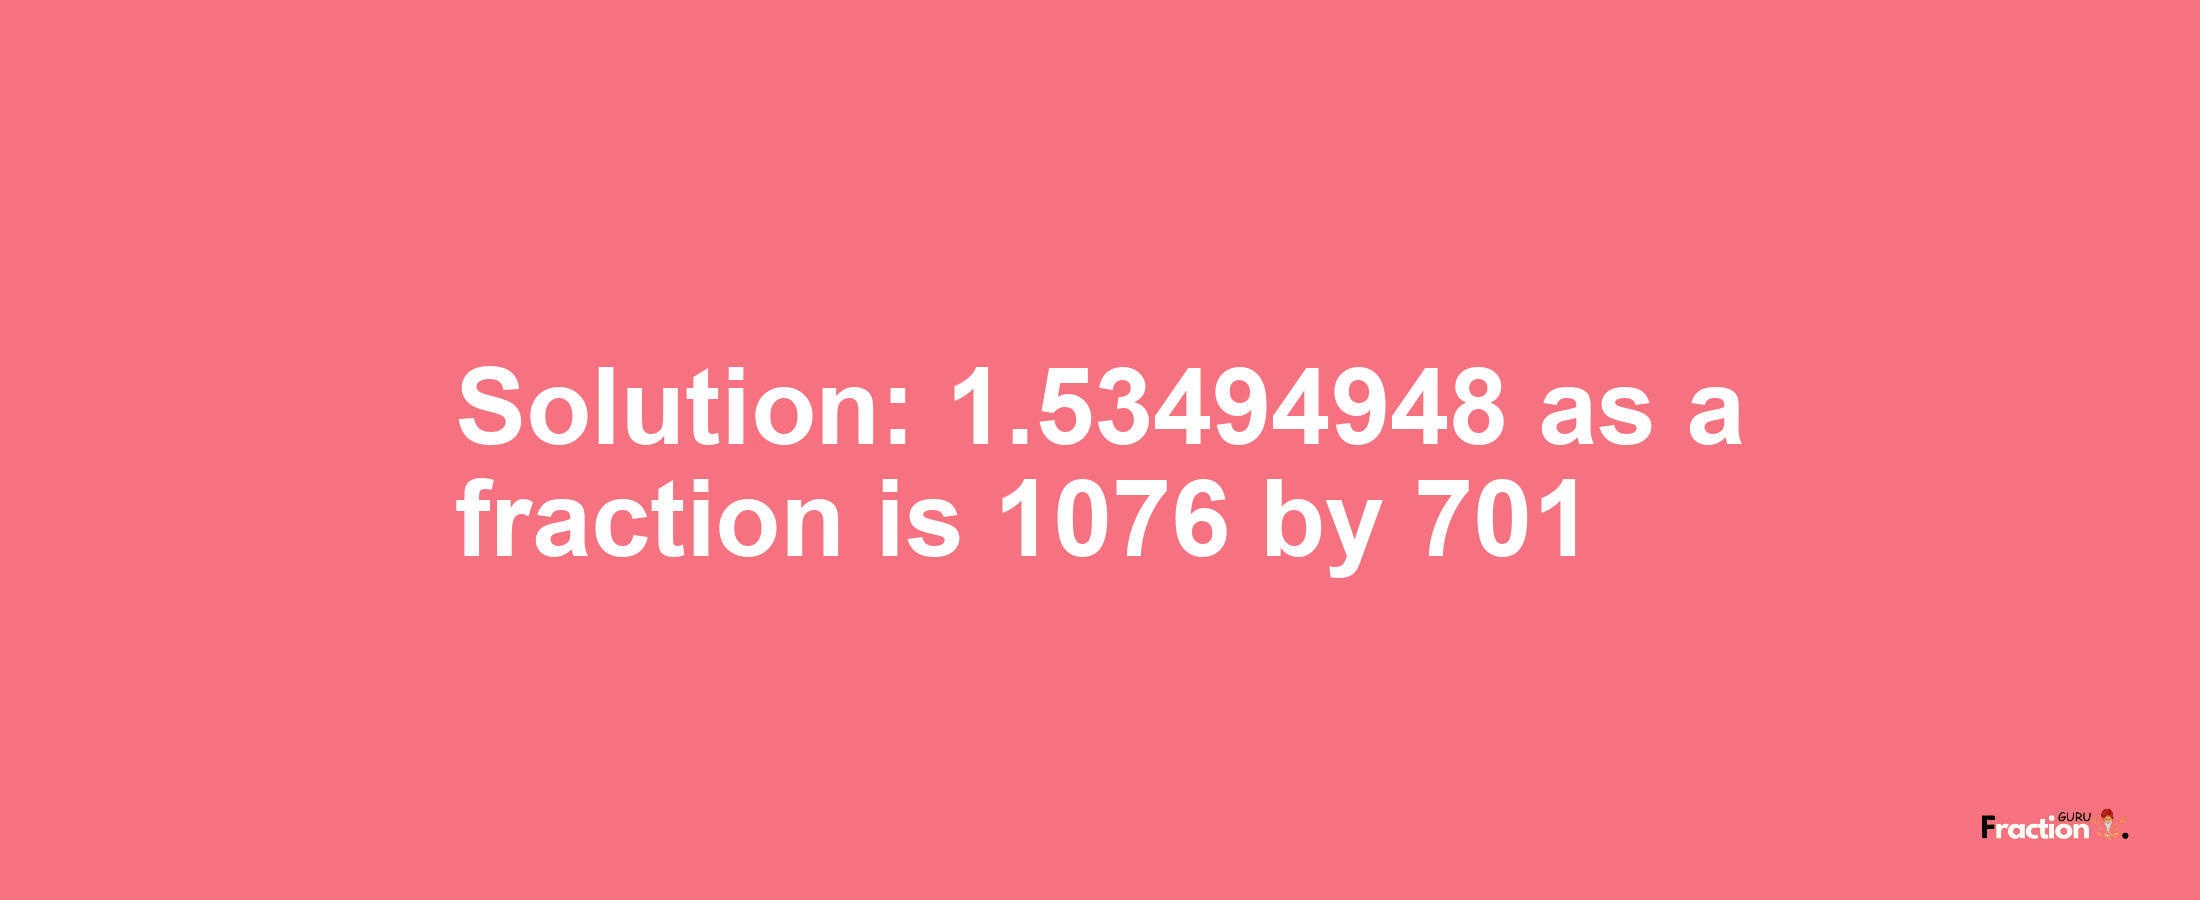 Solution:1.53494948 as a fraction is 1076/701